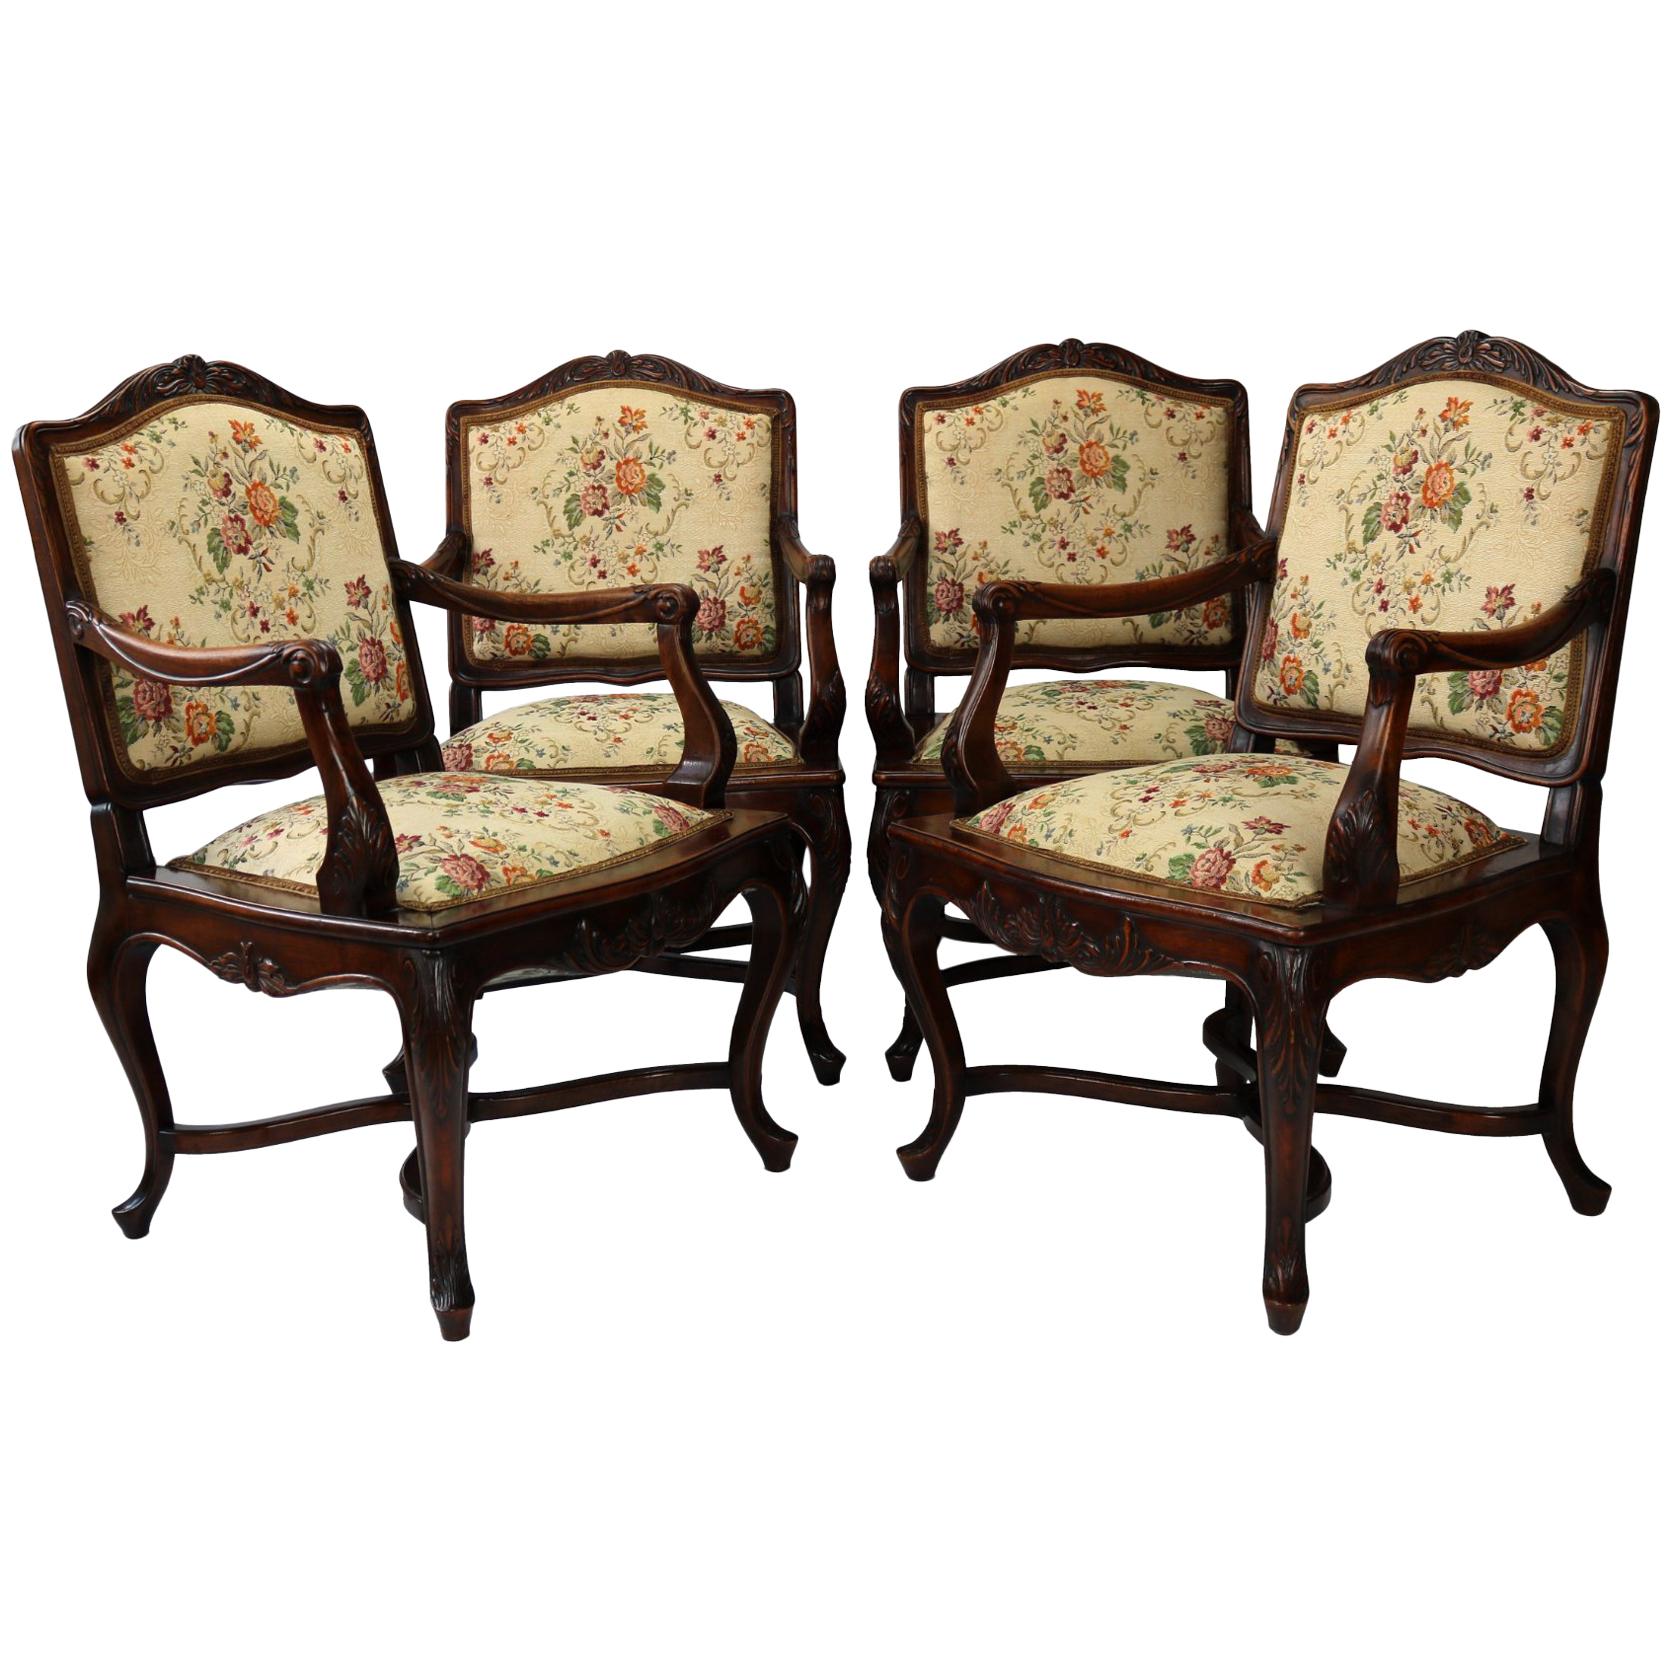 Set of Four Louis XV Rococo Style Carved Walnut Armchairs, circa 1860